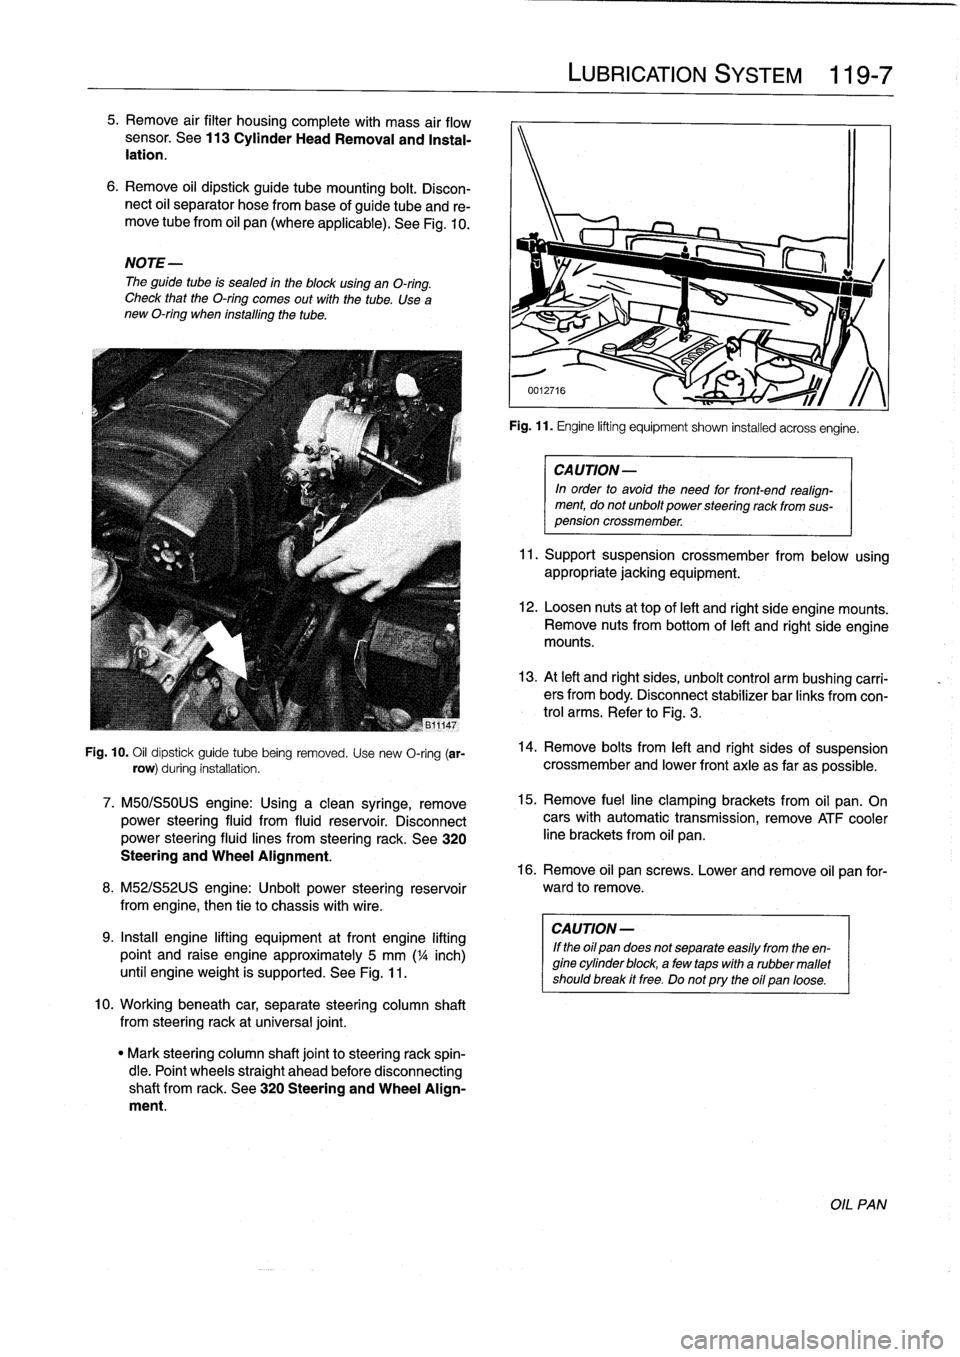 BMW 323i 1993 E36 Workshop Manual 
5
.
Remove
air
filter
housingcomplete
with
mass
air
flow
sensor
.
See113
Cylinder
HeadRemoval
and
Instal-
lation
.

6
.
Remove
oil
dipstick
guide
tube
mounting
bolt
.
Discon-
nect
oil
separator
hose
